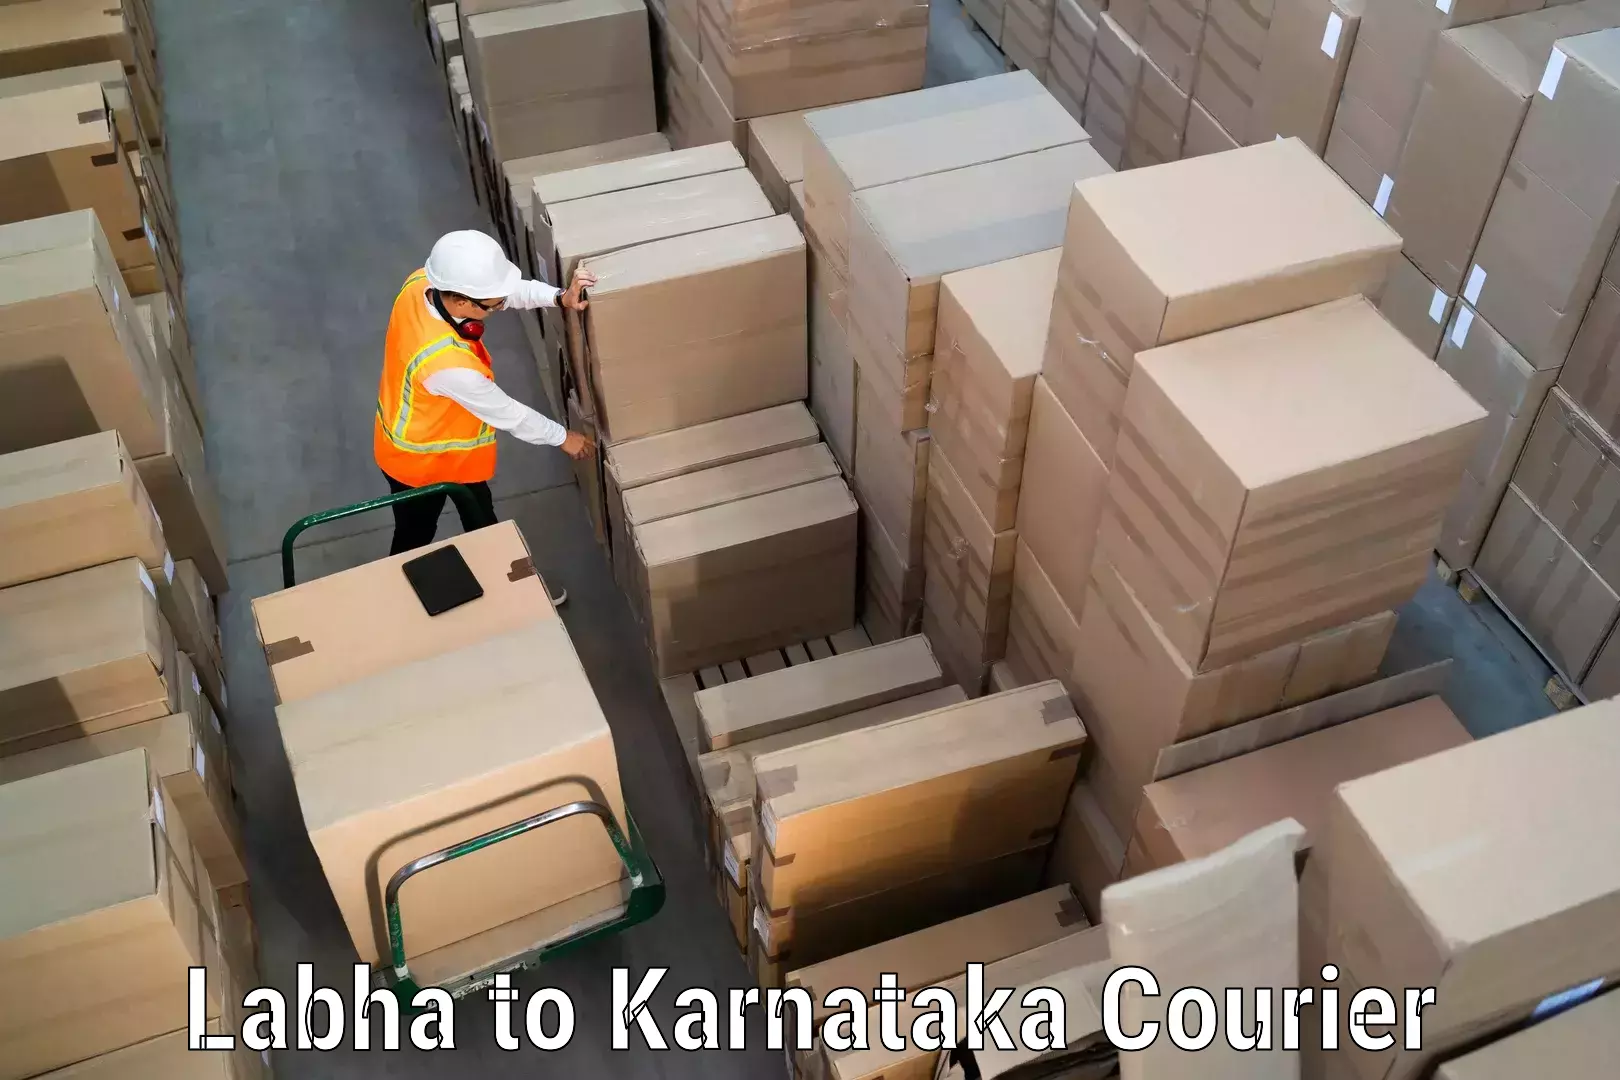 Courier dispatch services in Labha to Thirthahalli